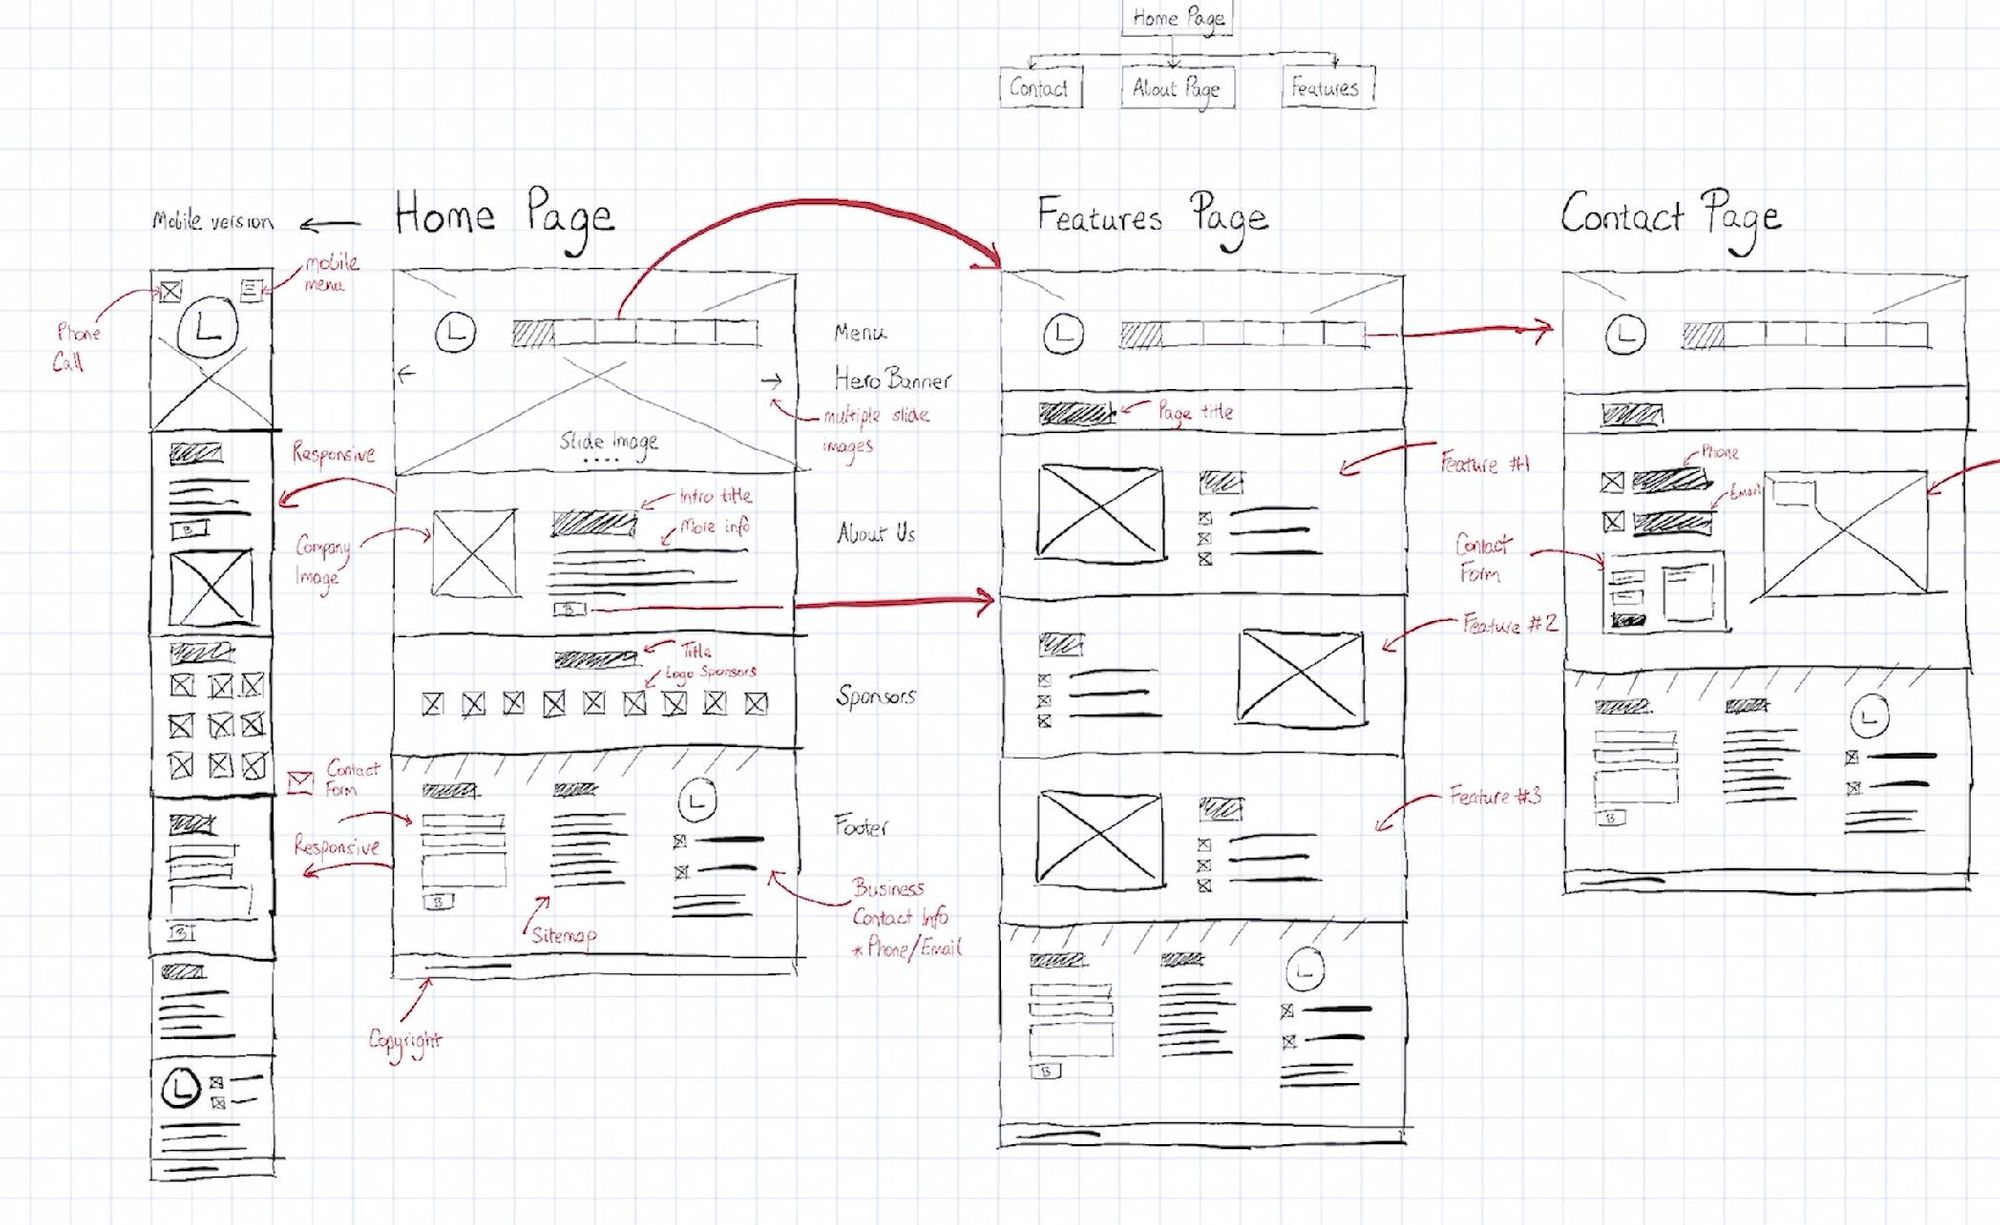 What is a Wireframe? This UX Design Tutorial Will Show You.